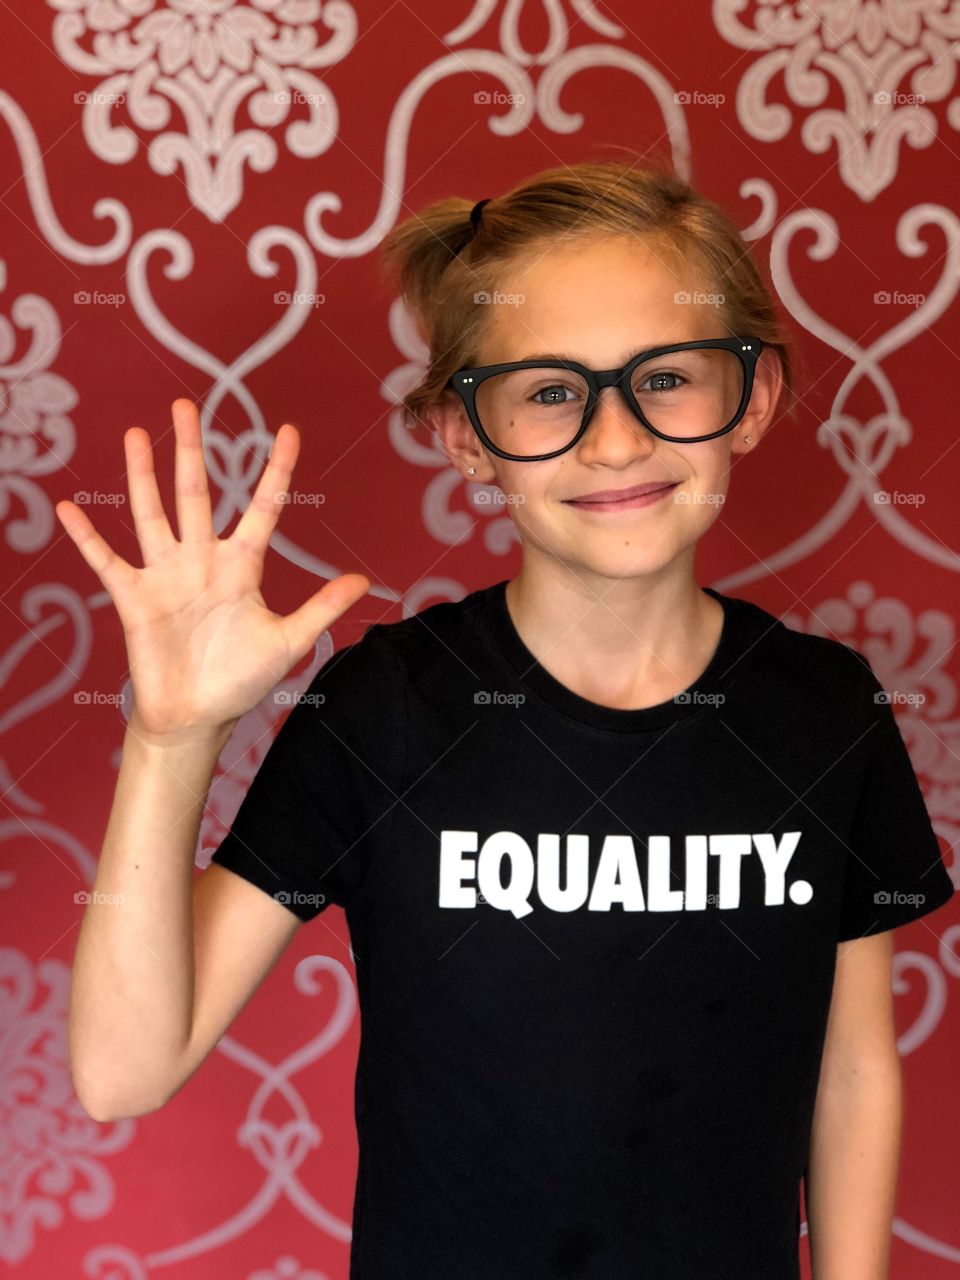 Equality Piper